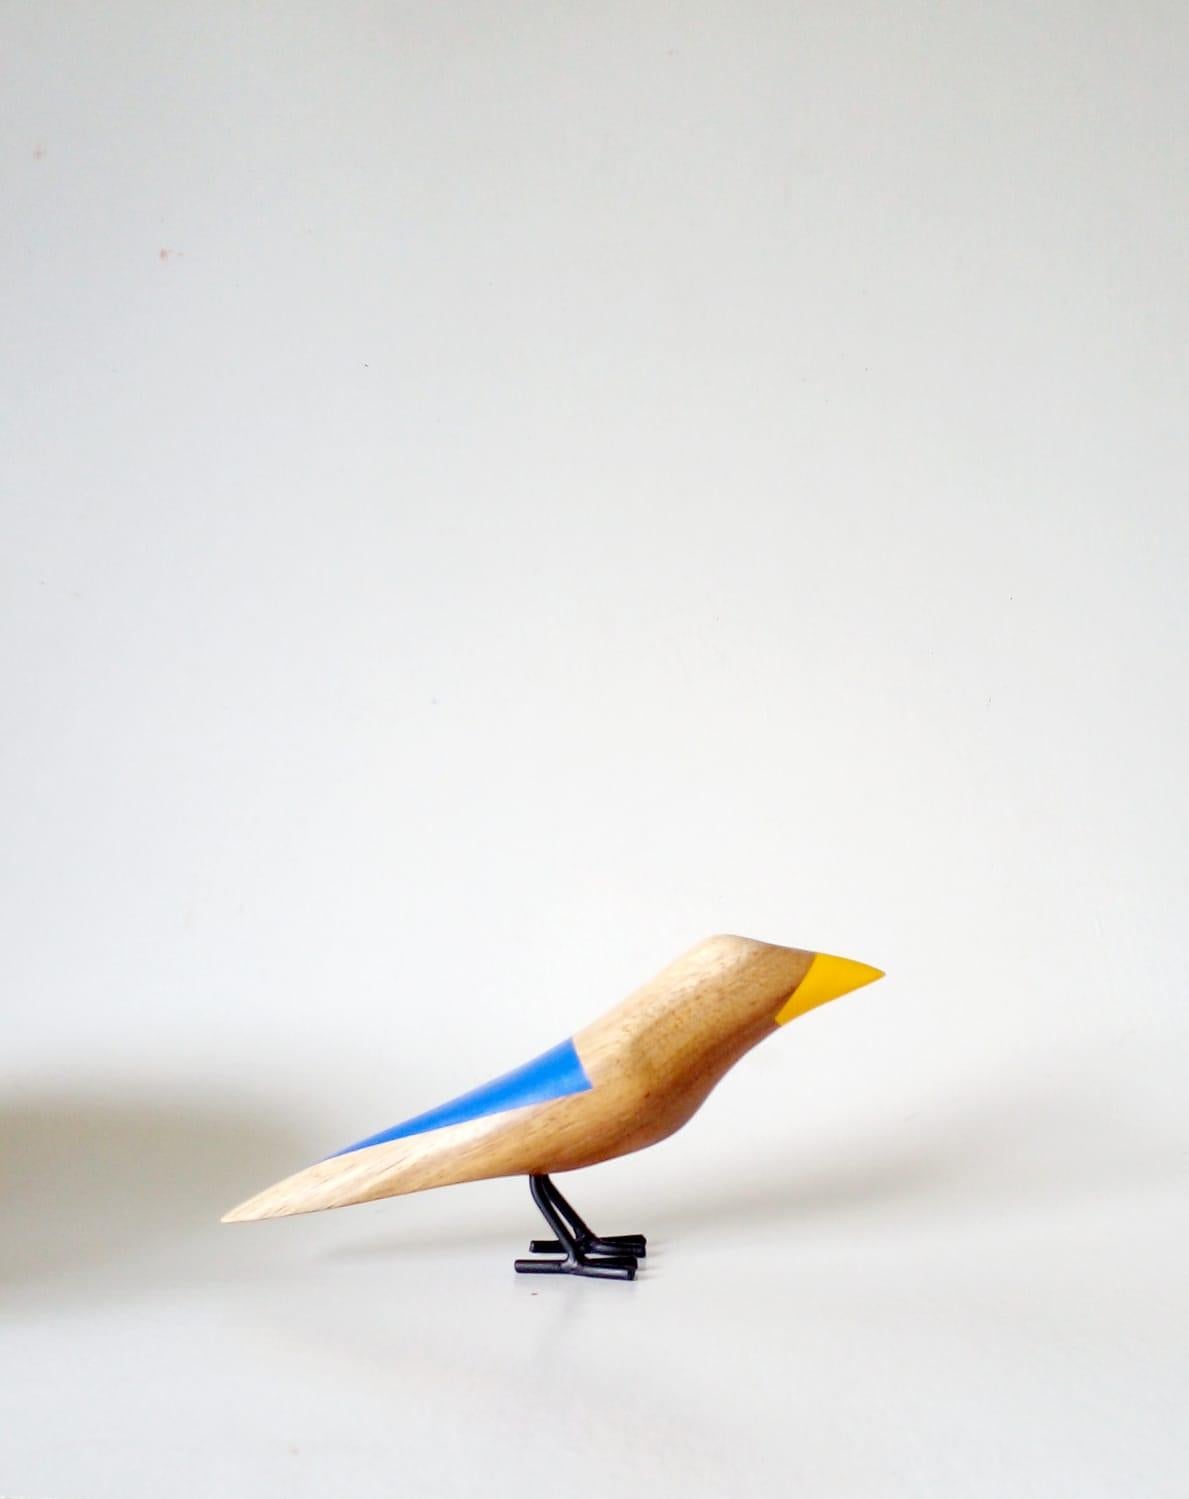 Birdies Collection, Contemporary Art, Sustainable Art, Reclaimed Wood   - Brown Abstract Sculpture by Davit Nava